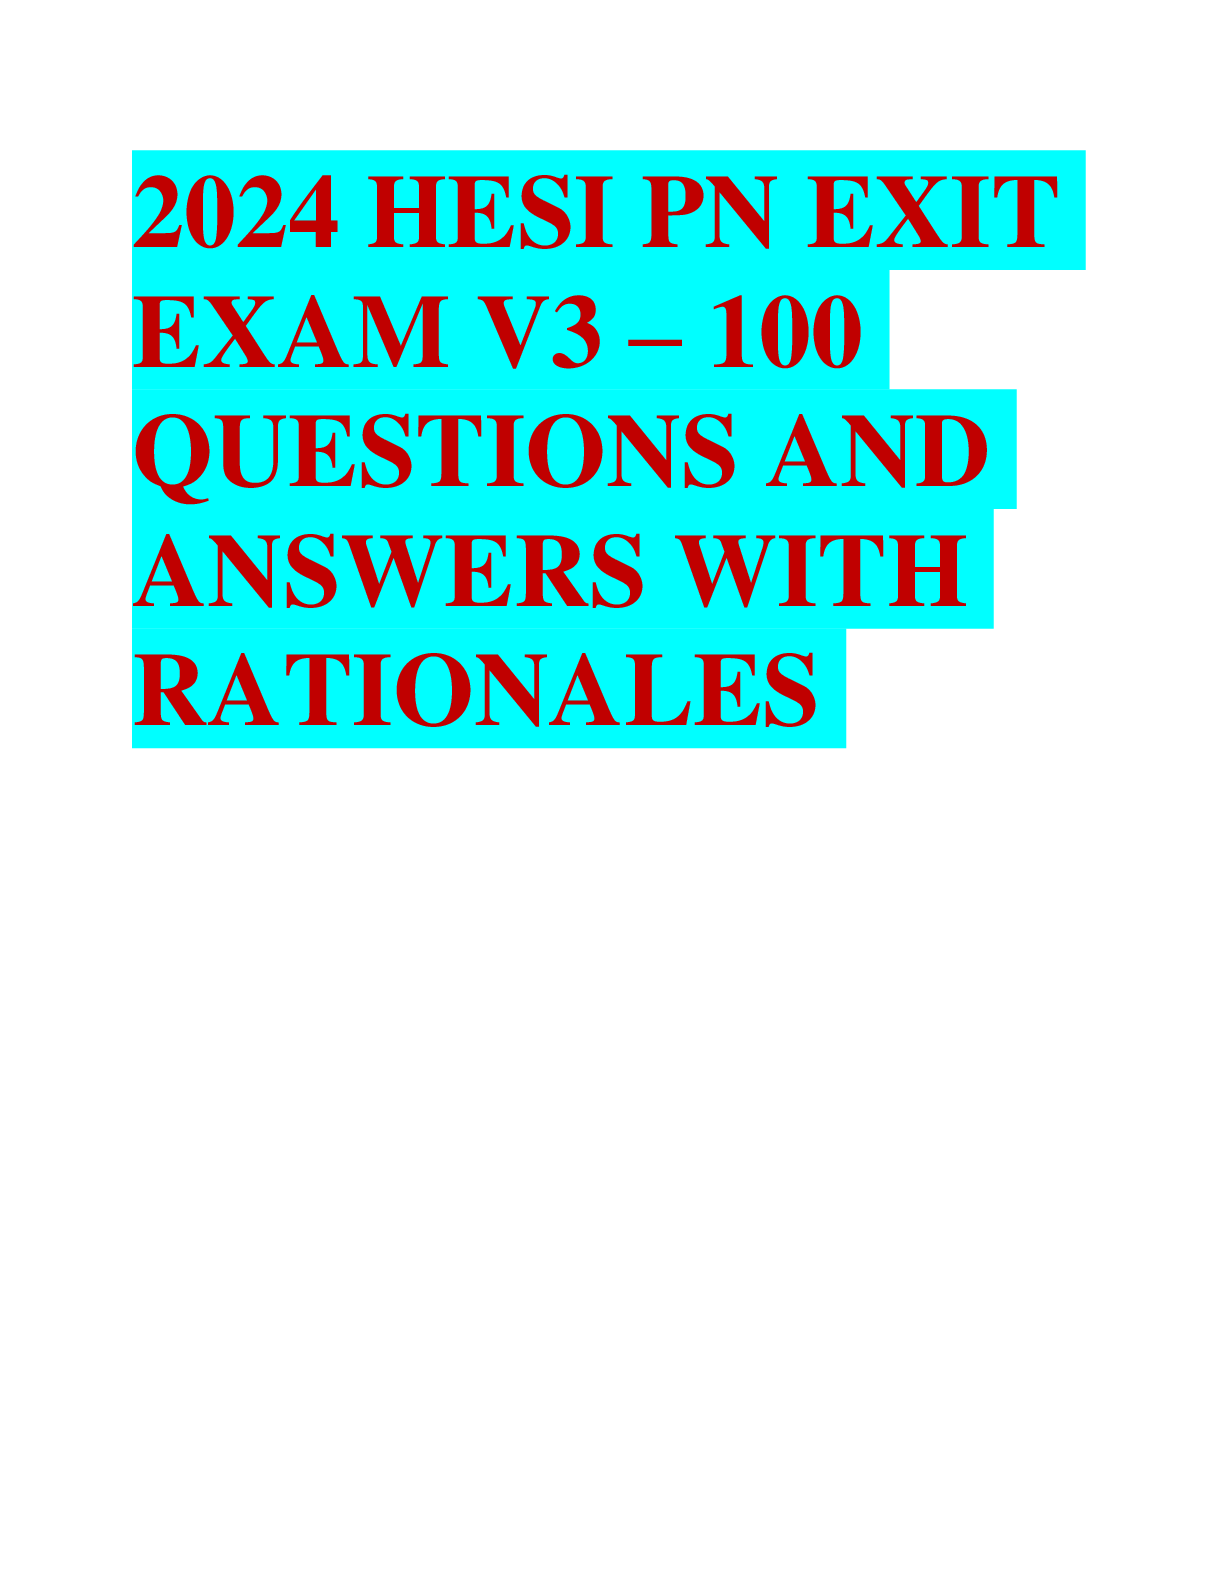 2024 HESI PN EXIT EXAM V3 100 QUESTIONS AND ANSWERS WITH RATIONALES